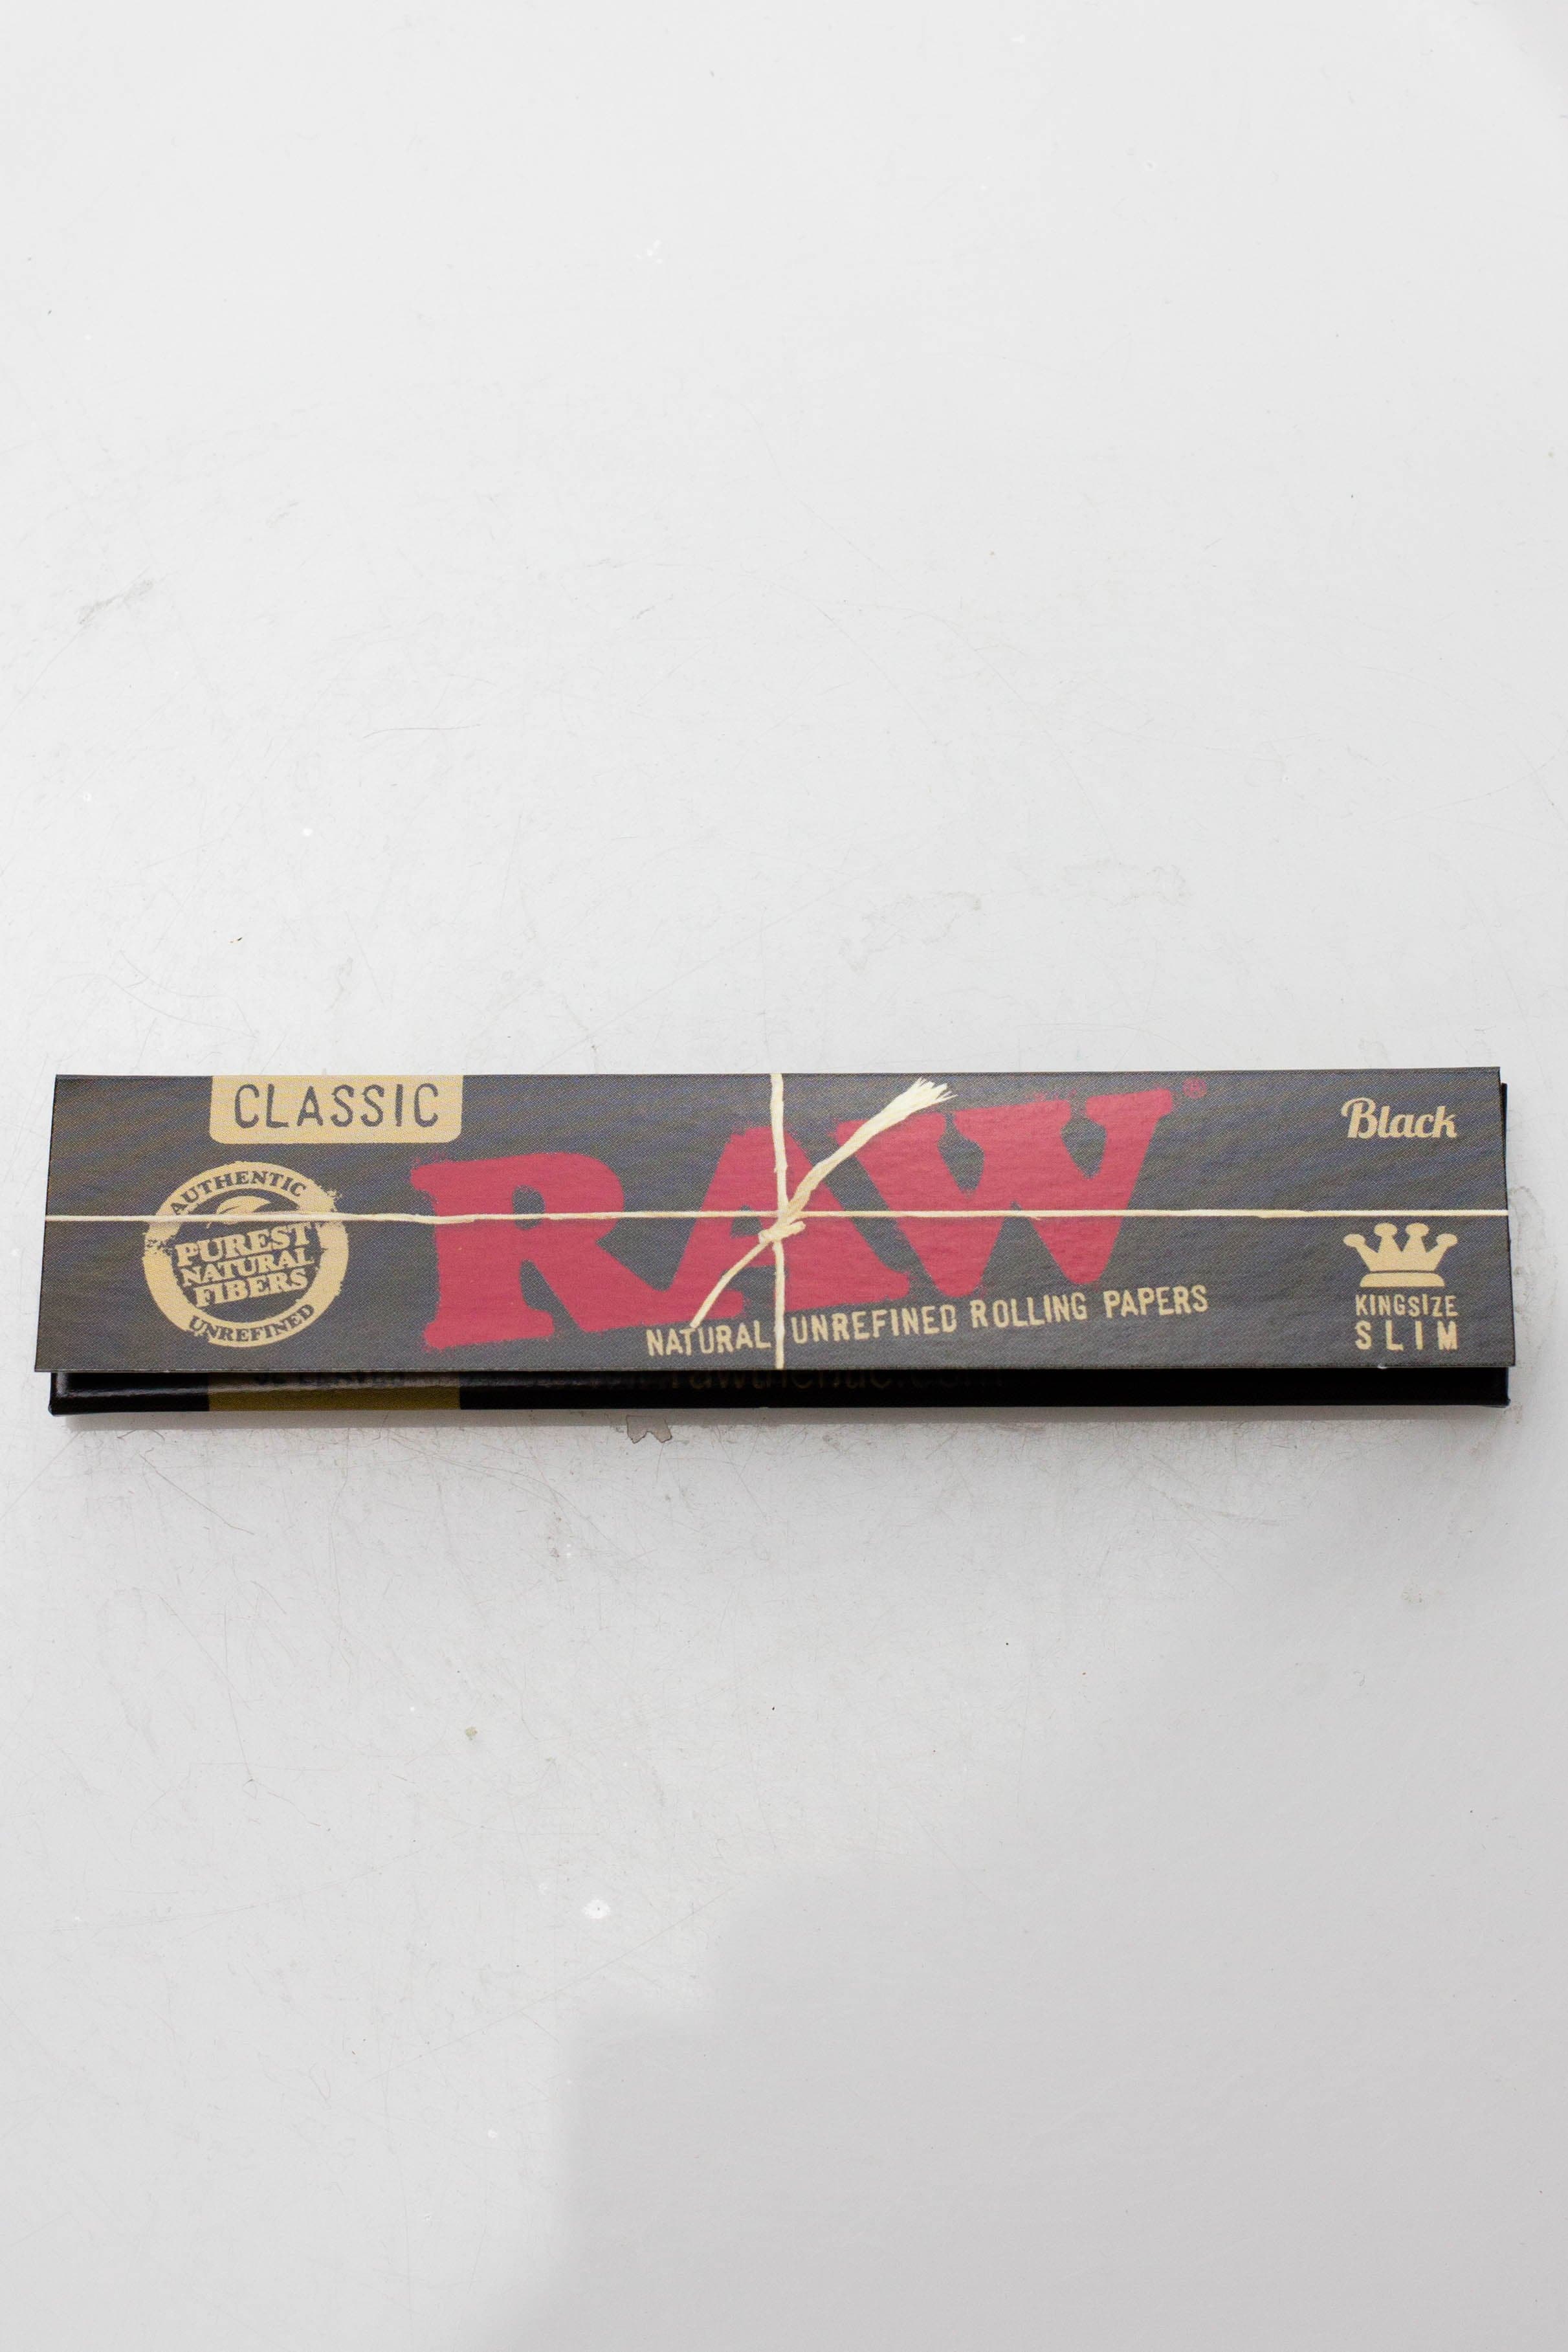 RAW Black Natural Unrefined Rolling Paper